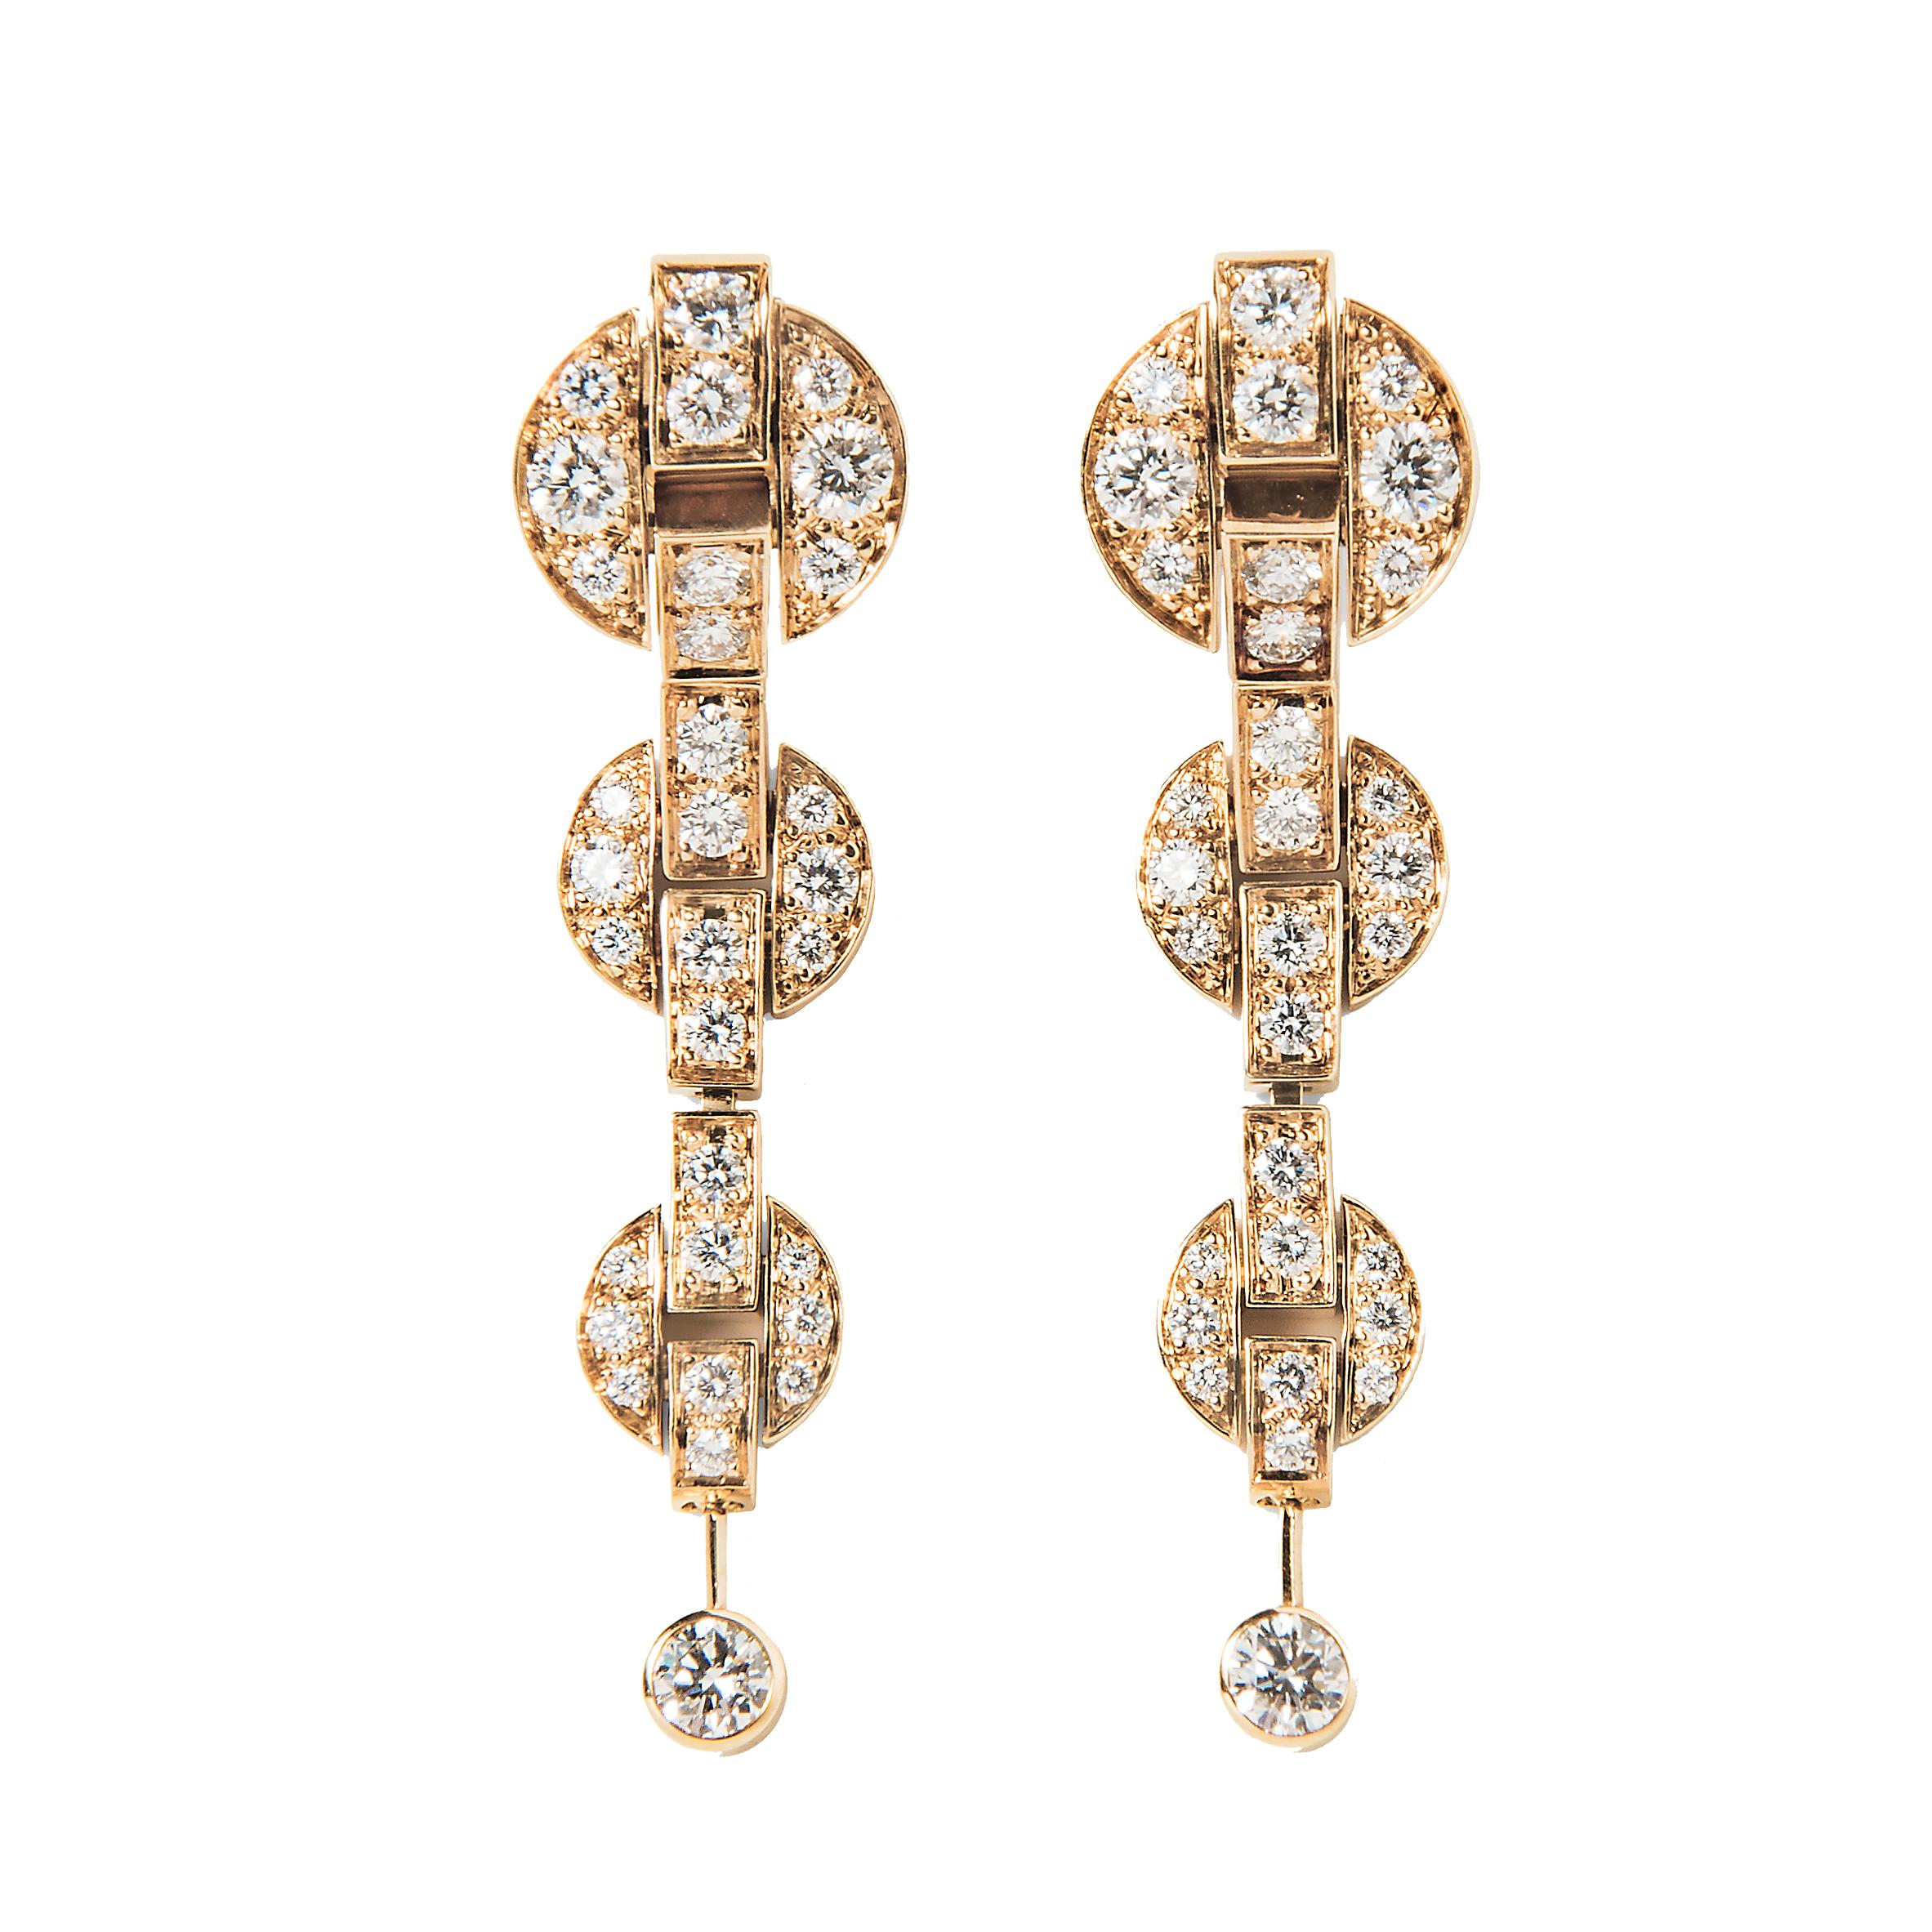 Instantly recognizable as Cartier, these Himalia earrings feature an effortlessly modern circular design throughout. Individual 18k yellow gold circlets are set with the finest Cartier round brilliant cut diamonds, linked together to form these